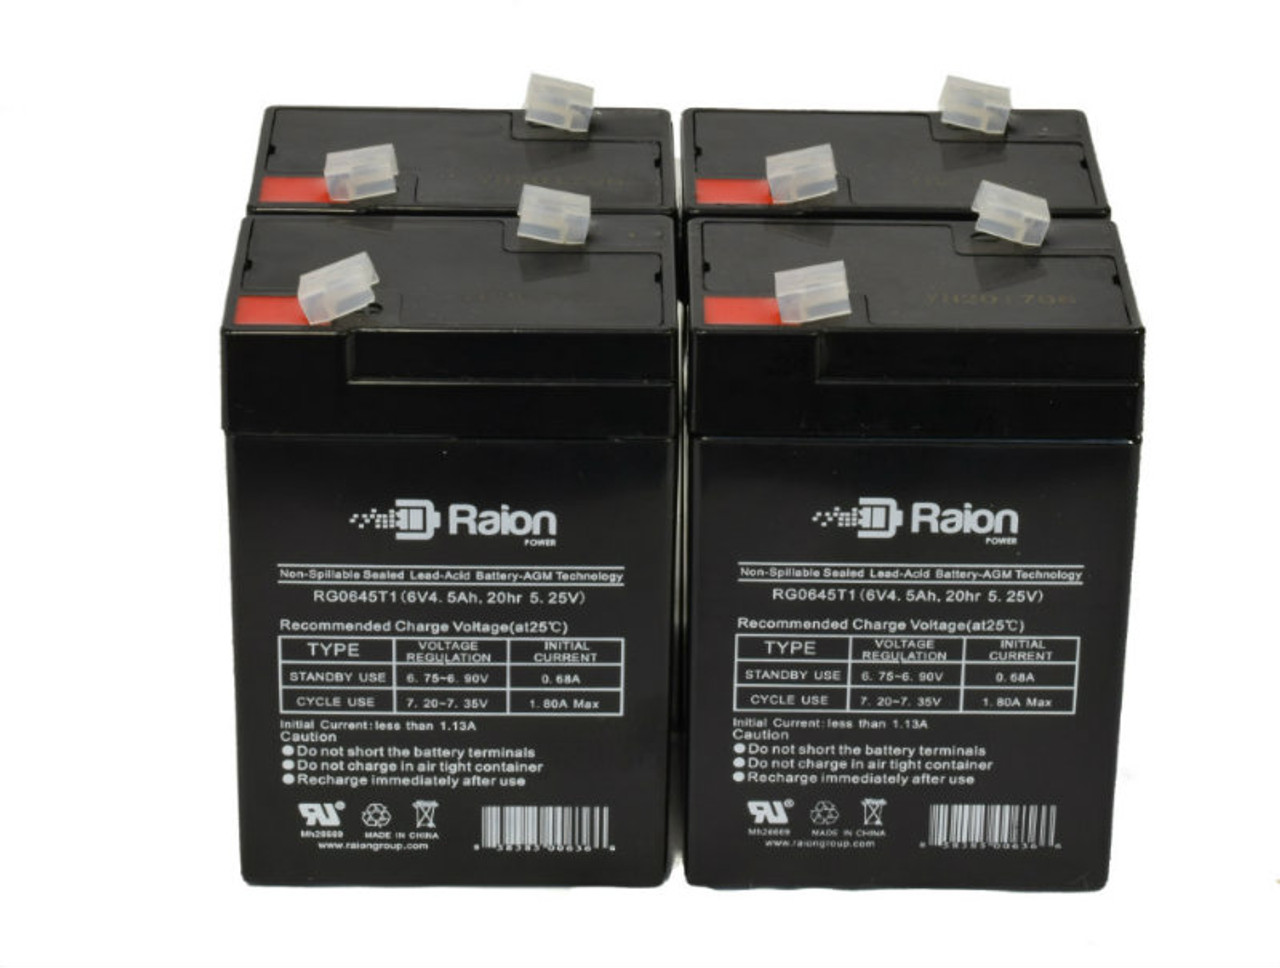 Raion Power 6V 4.5Ah Replacement Emergency Light Battery for Detex ECL230MD - 4 Pack